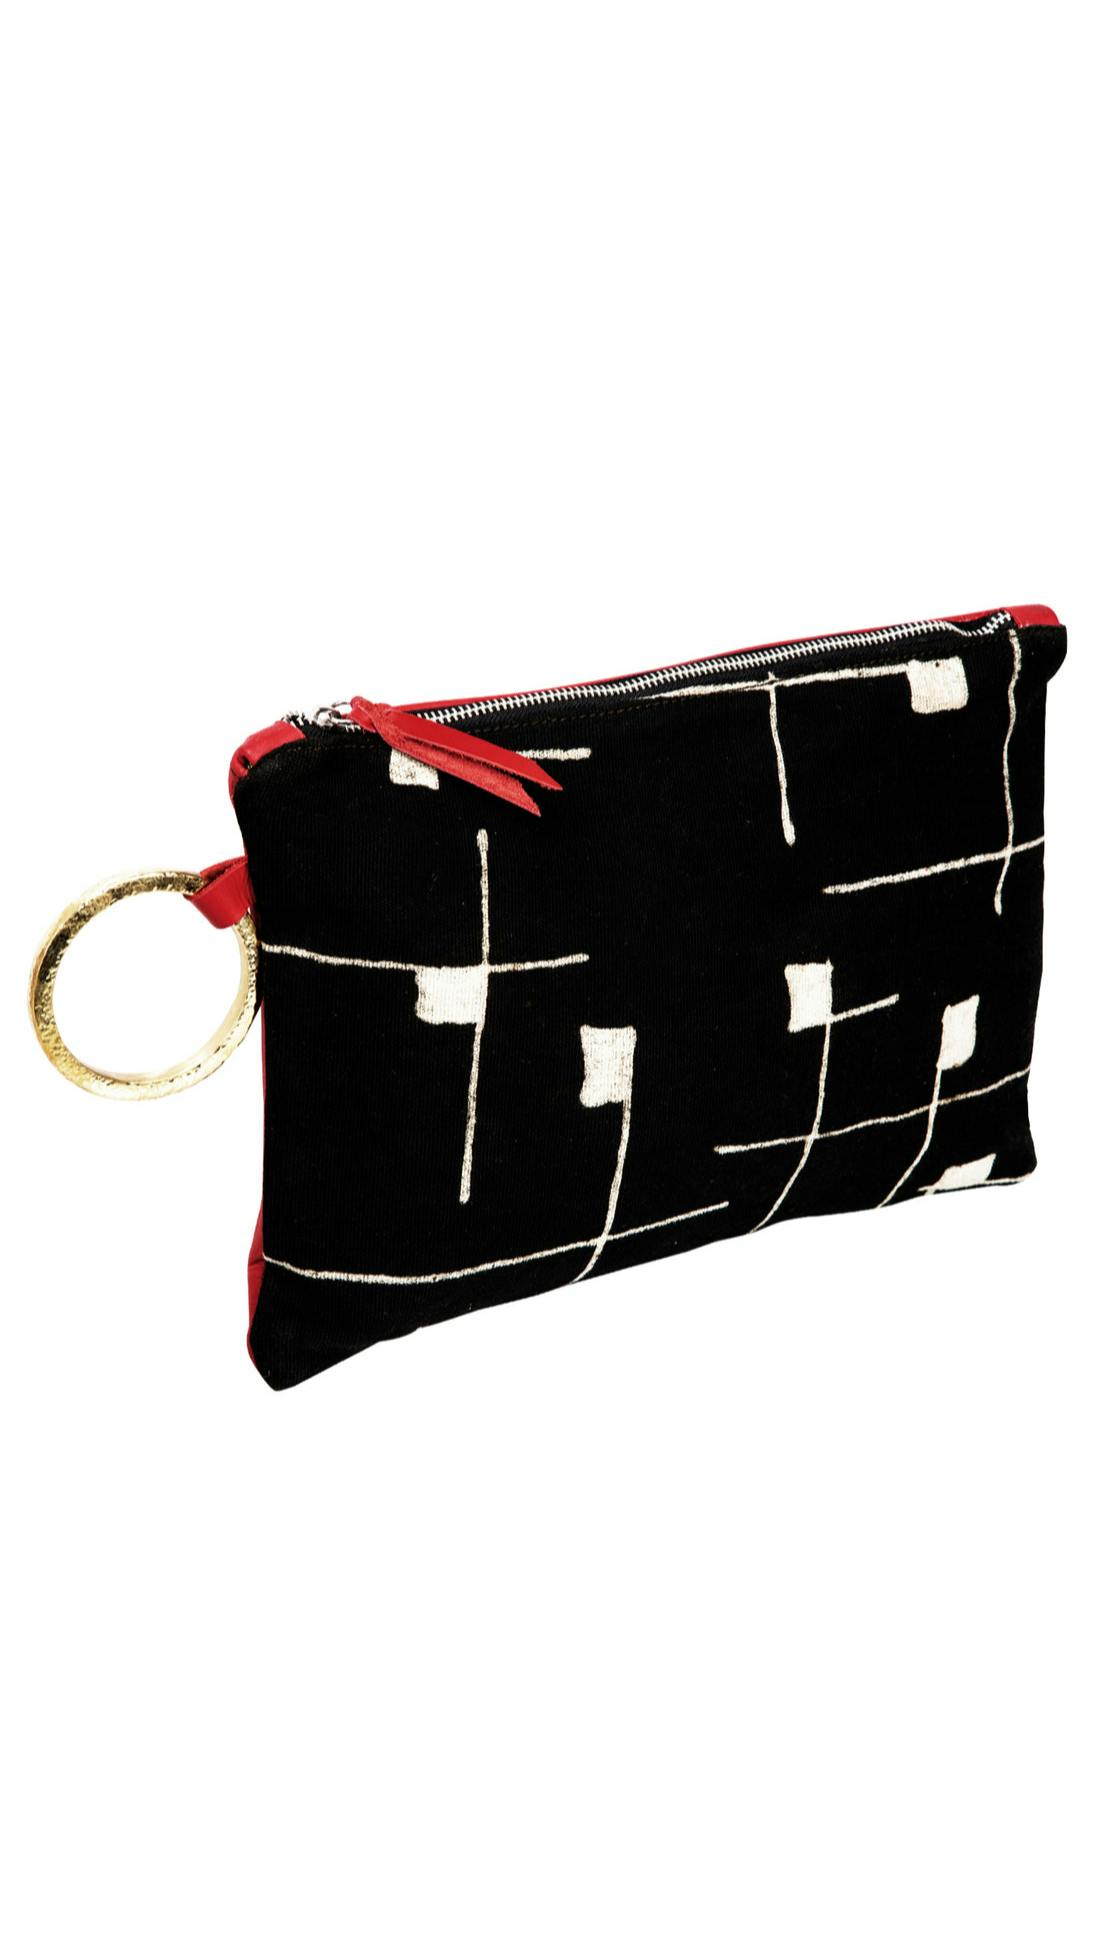 Val Mudcloth Clutch Bag, a product by Adele Dejak